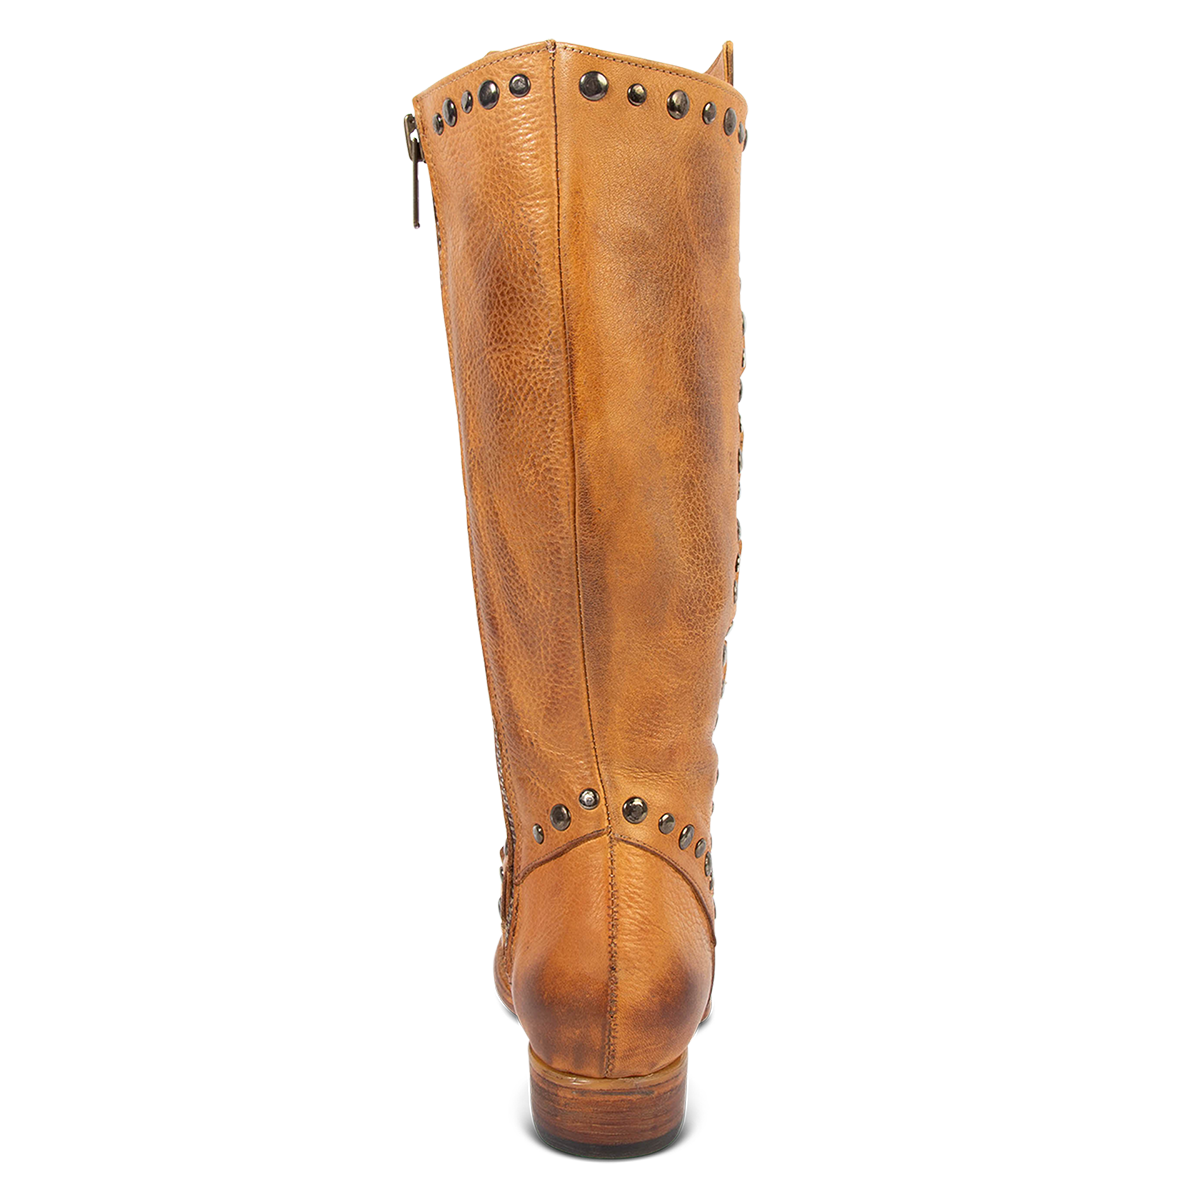 Back view showing low block heel and studded detailing on FREEBIRD women's Rory wheat leather boot